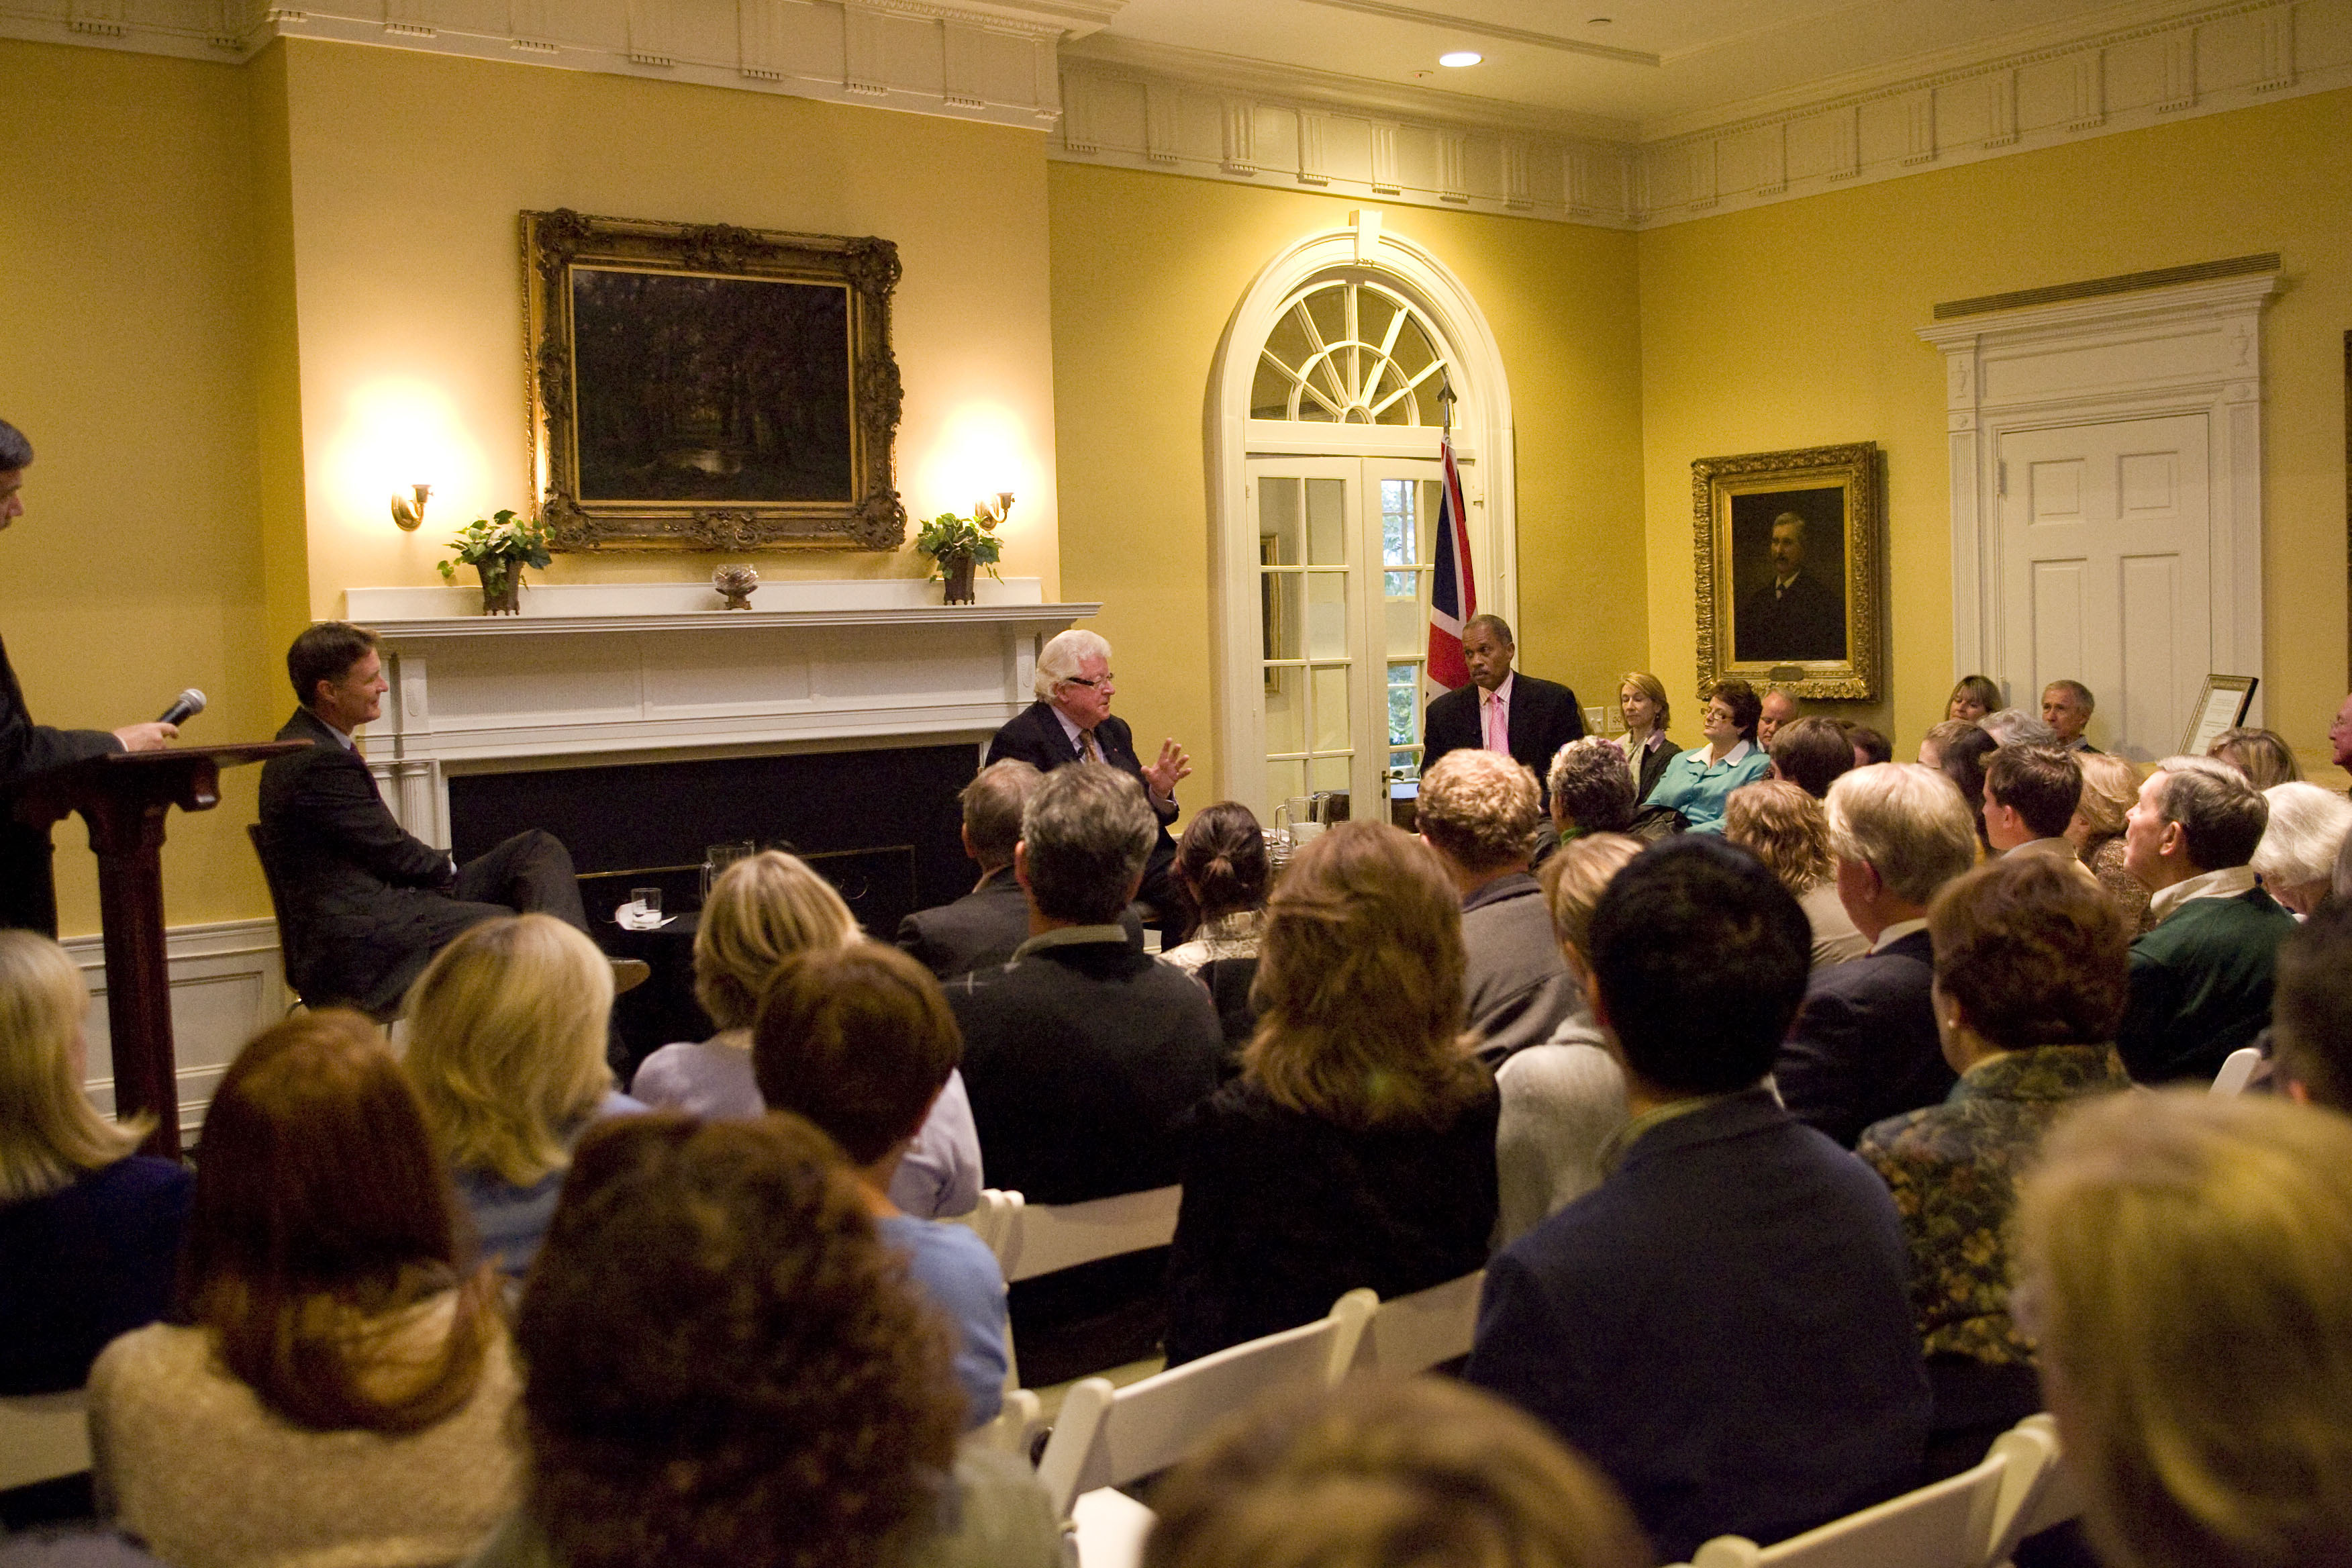 Group of people listen to a man speaking at the front of a room during a panel discussion